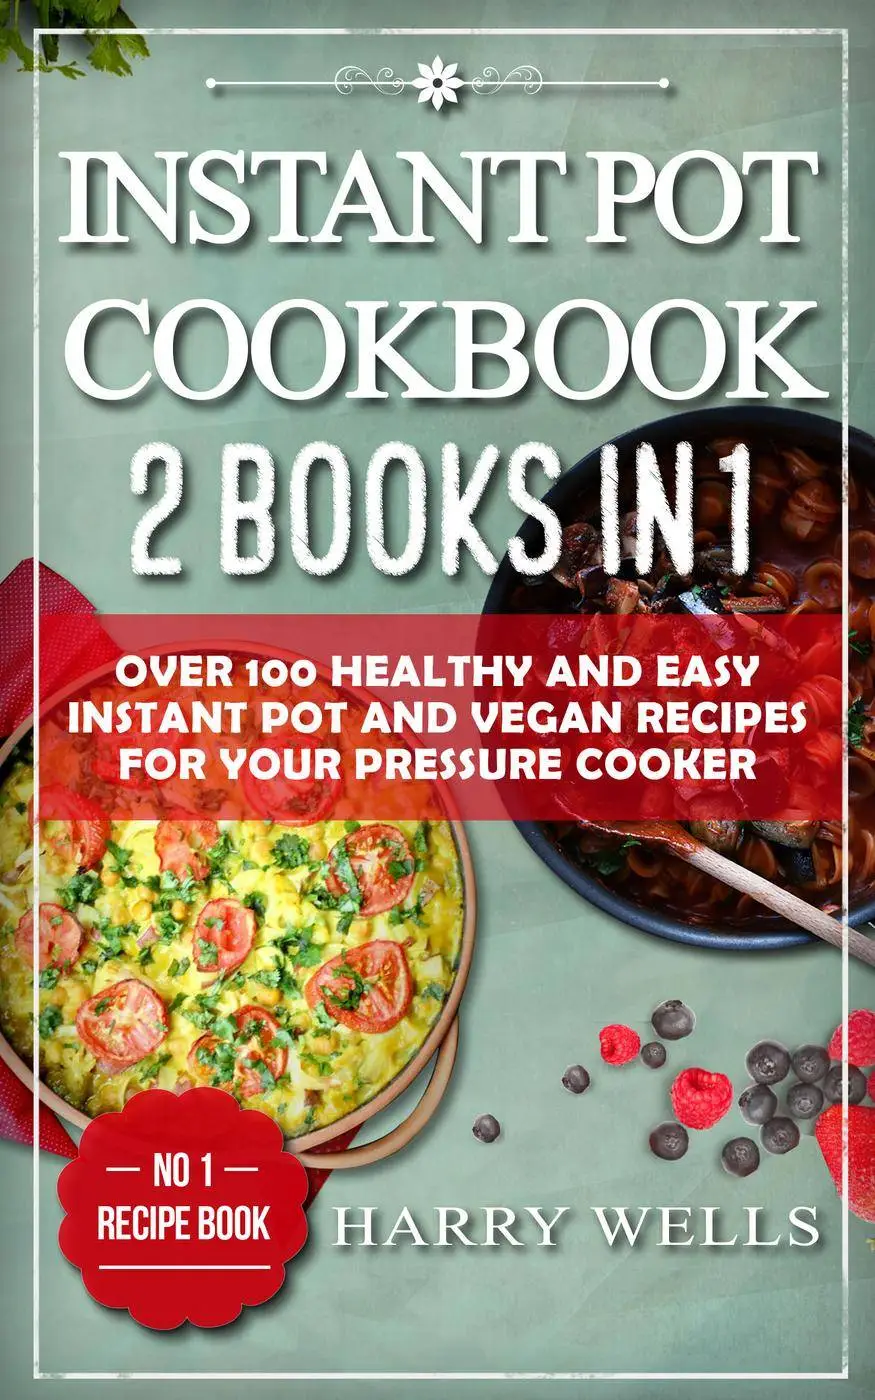 Instant Pot Cookbook: 2 Books in 1--Over 100 Healthy and Easy Instant ...